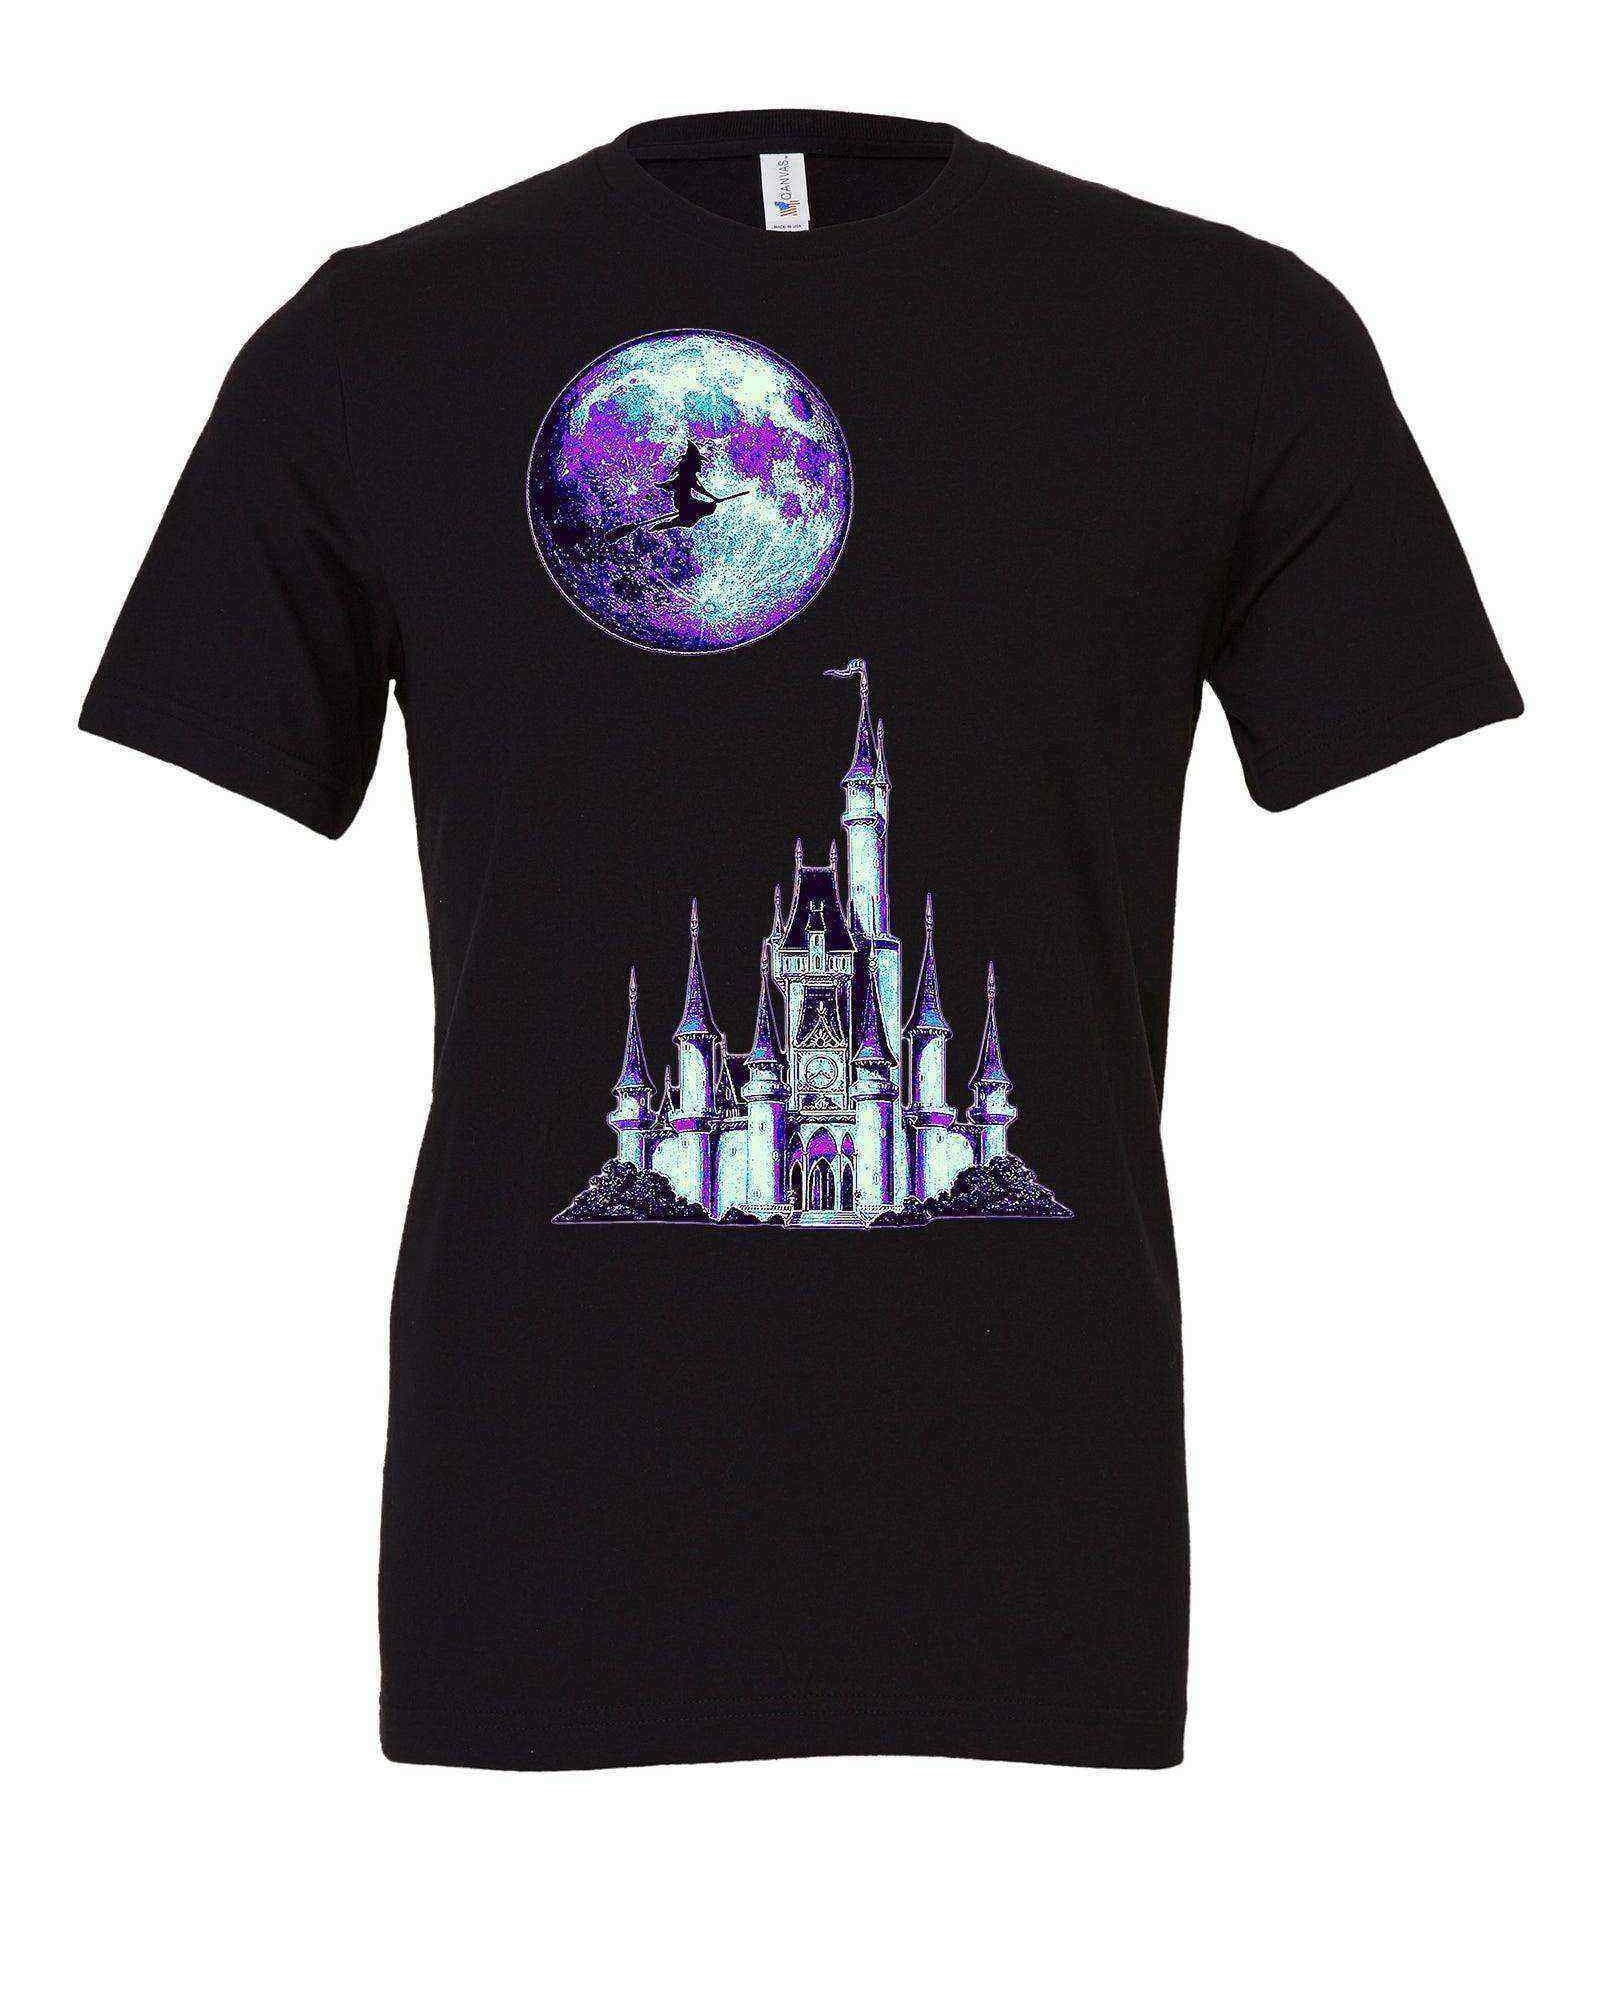 Not So Scary Halloween Shirt | Boo To You | Haunted Castle - Dylan's Tees